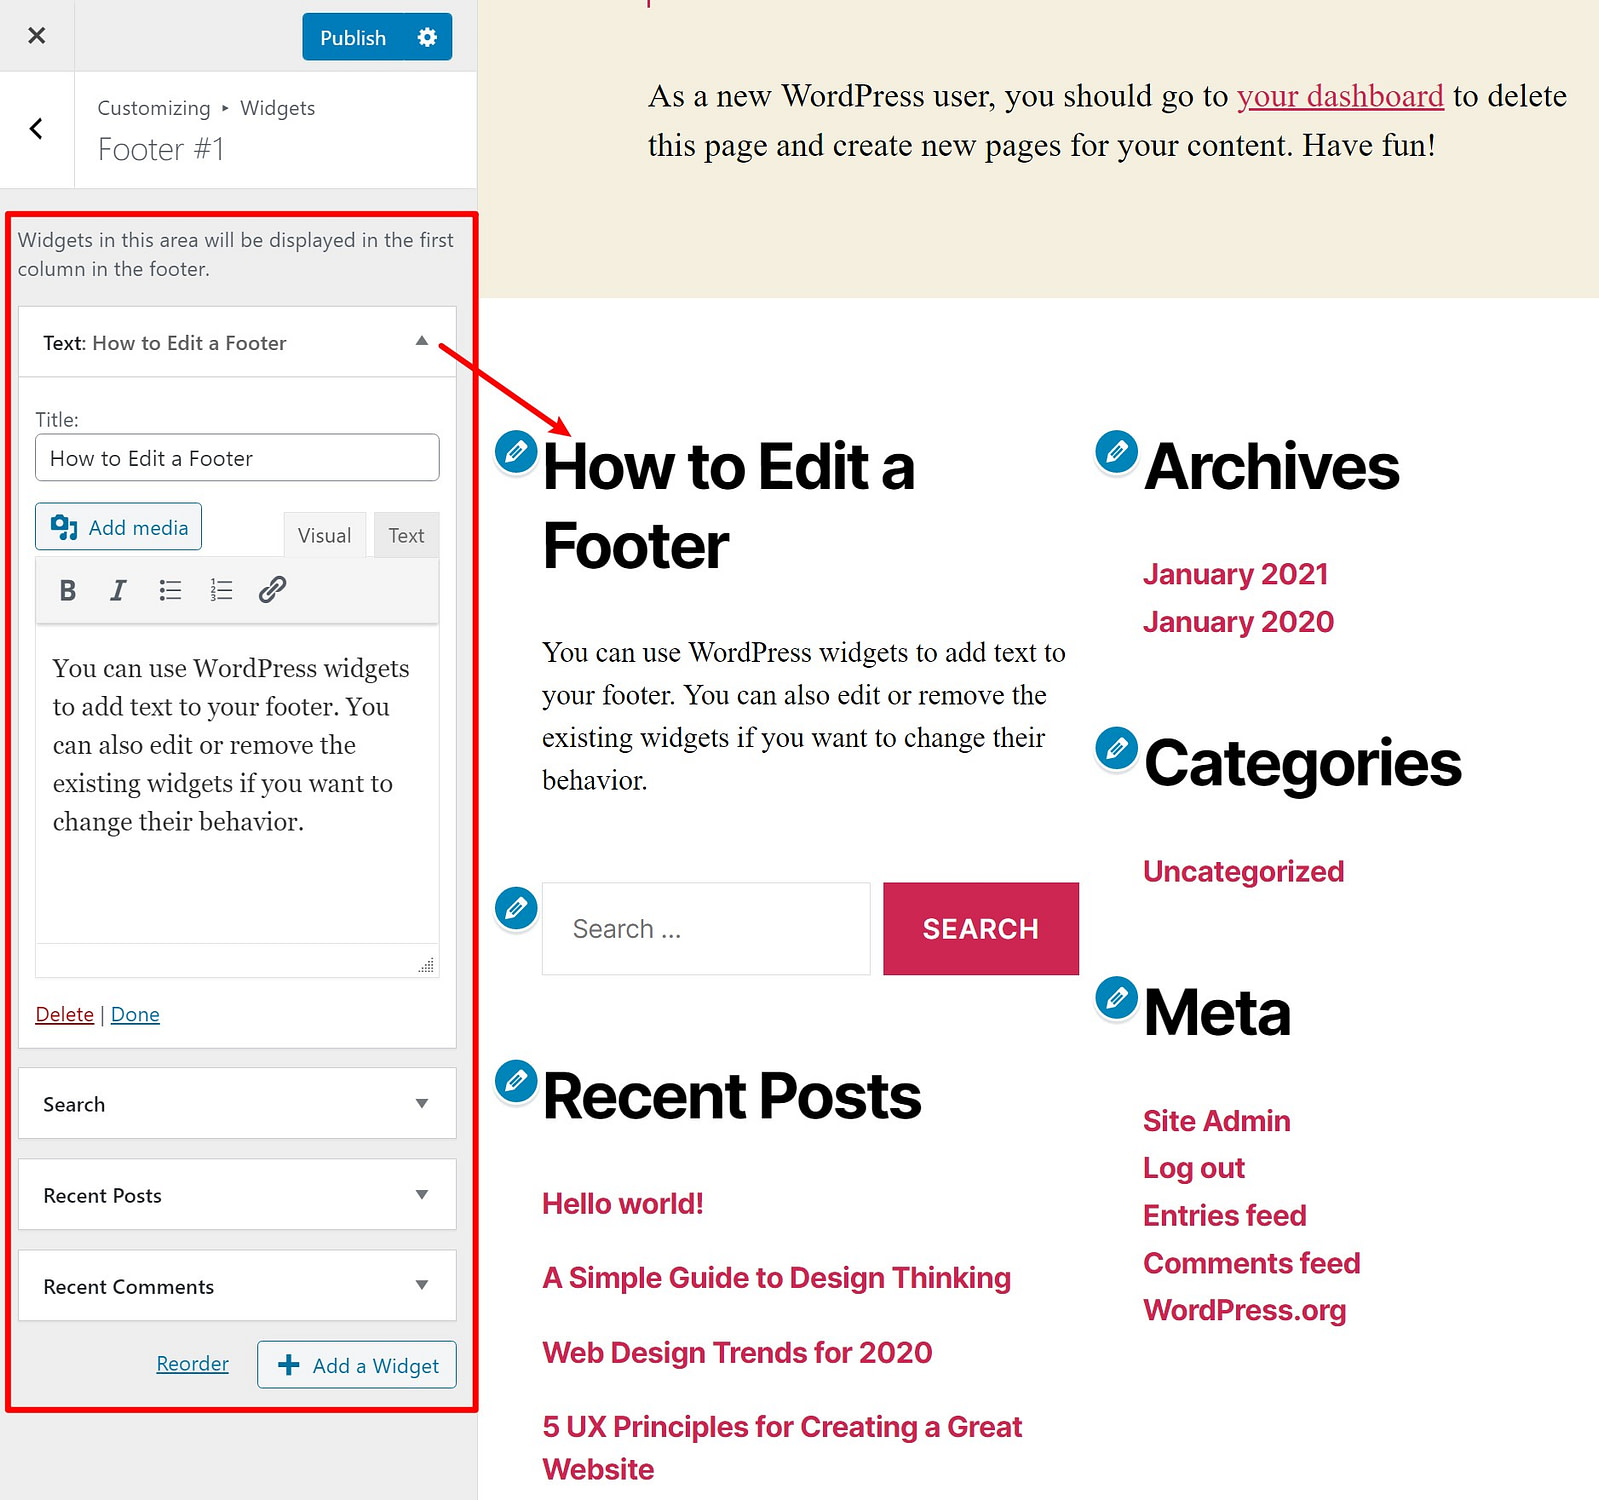 How to edit a footer in WordPress with widgets